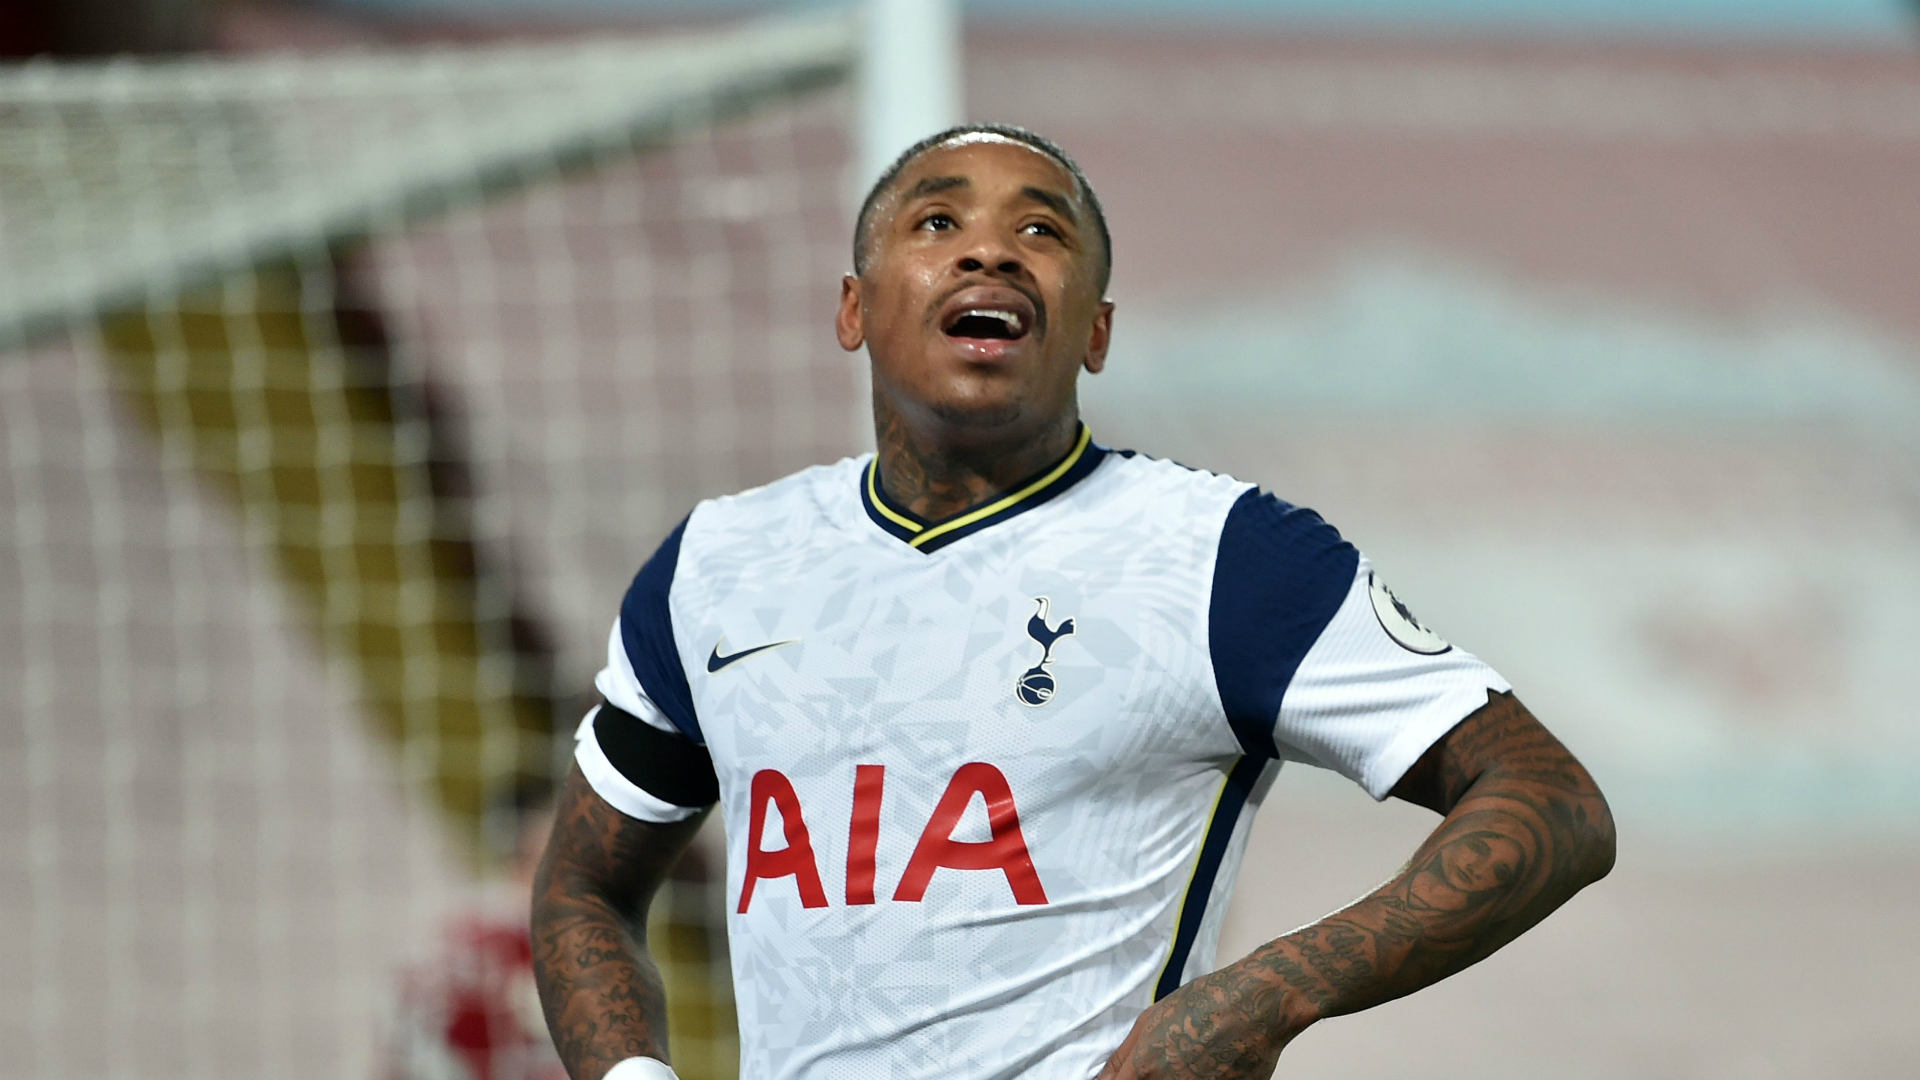 'He's one of my boys' - Spurs boss Mourinho leaps to Bergwijn defence after social media abuse